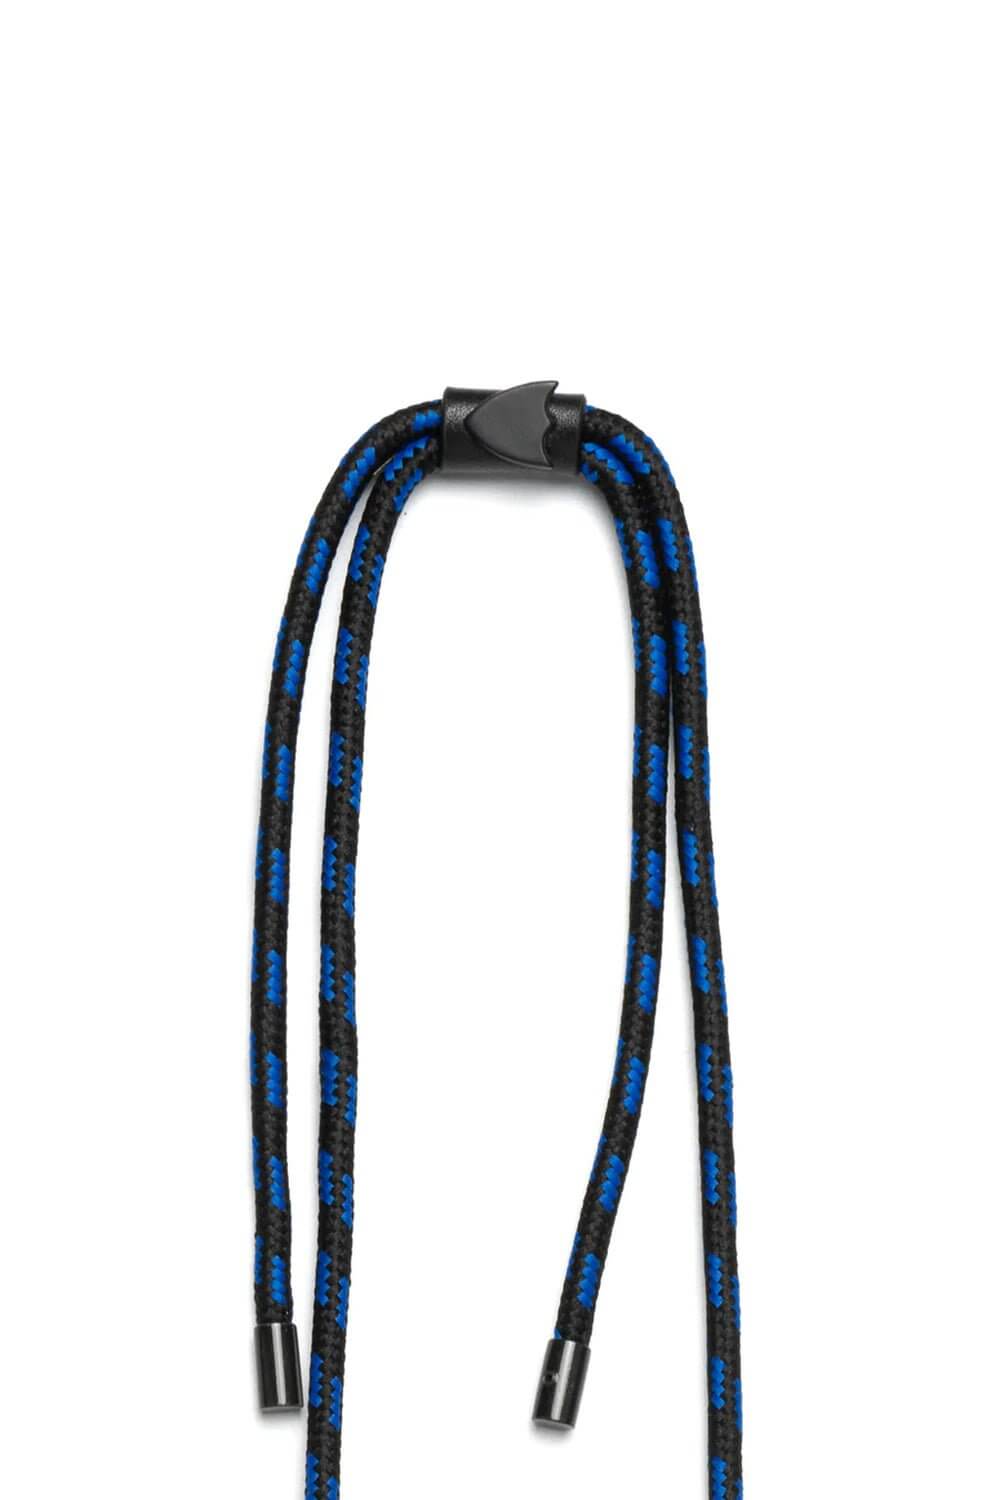 ROPE IPHONE HOLDER Iphone 11PRO MAX case with technical rope neck strap and leather logo detail. Adjustable length. Black/Fluo Blue colour. HTC LOS ANGELES